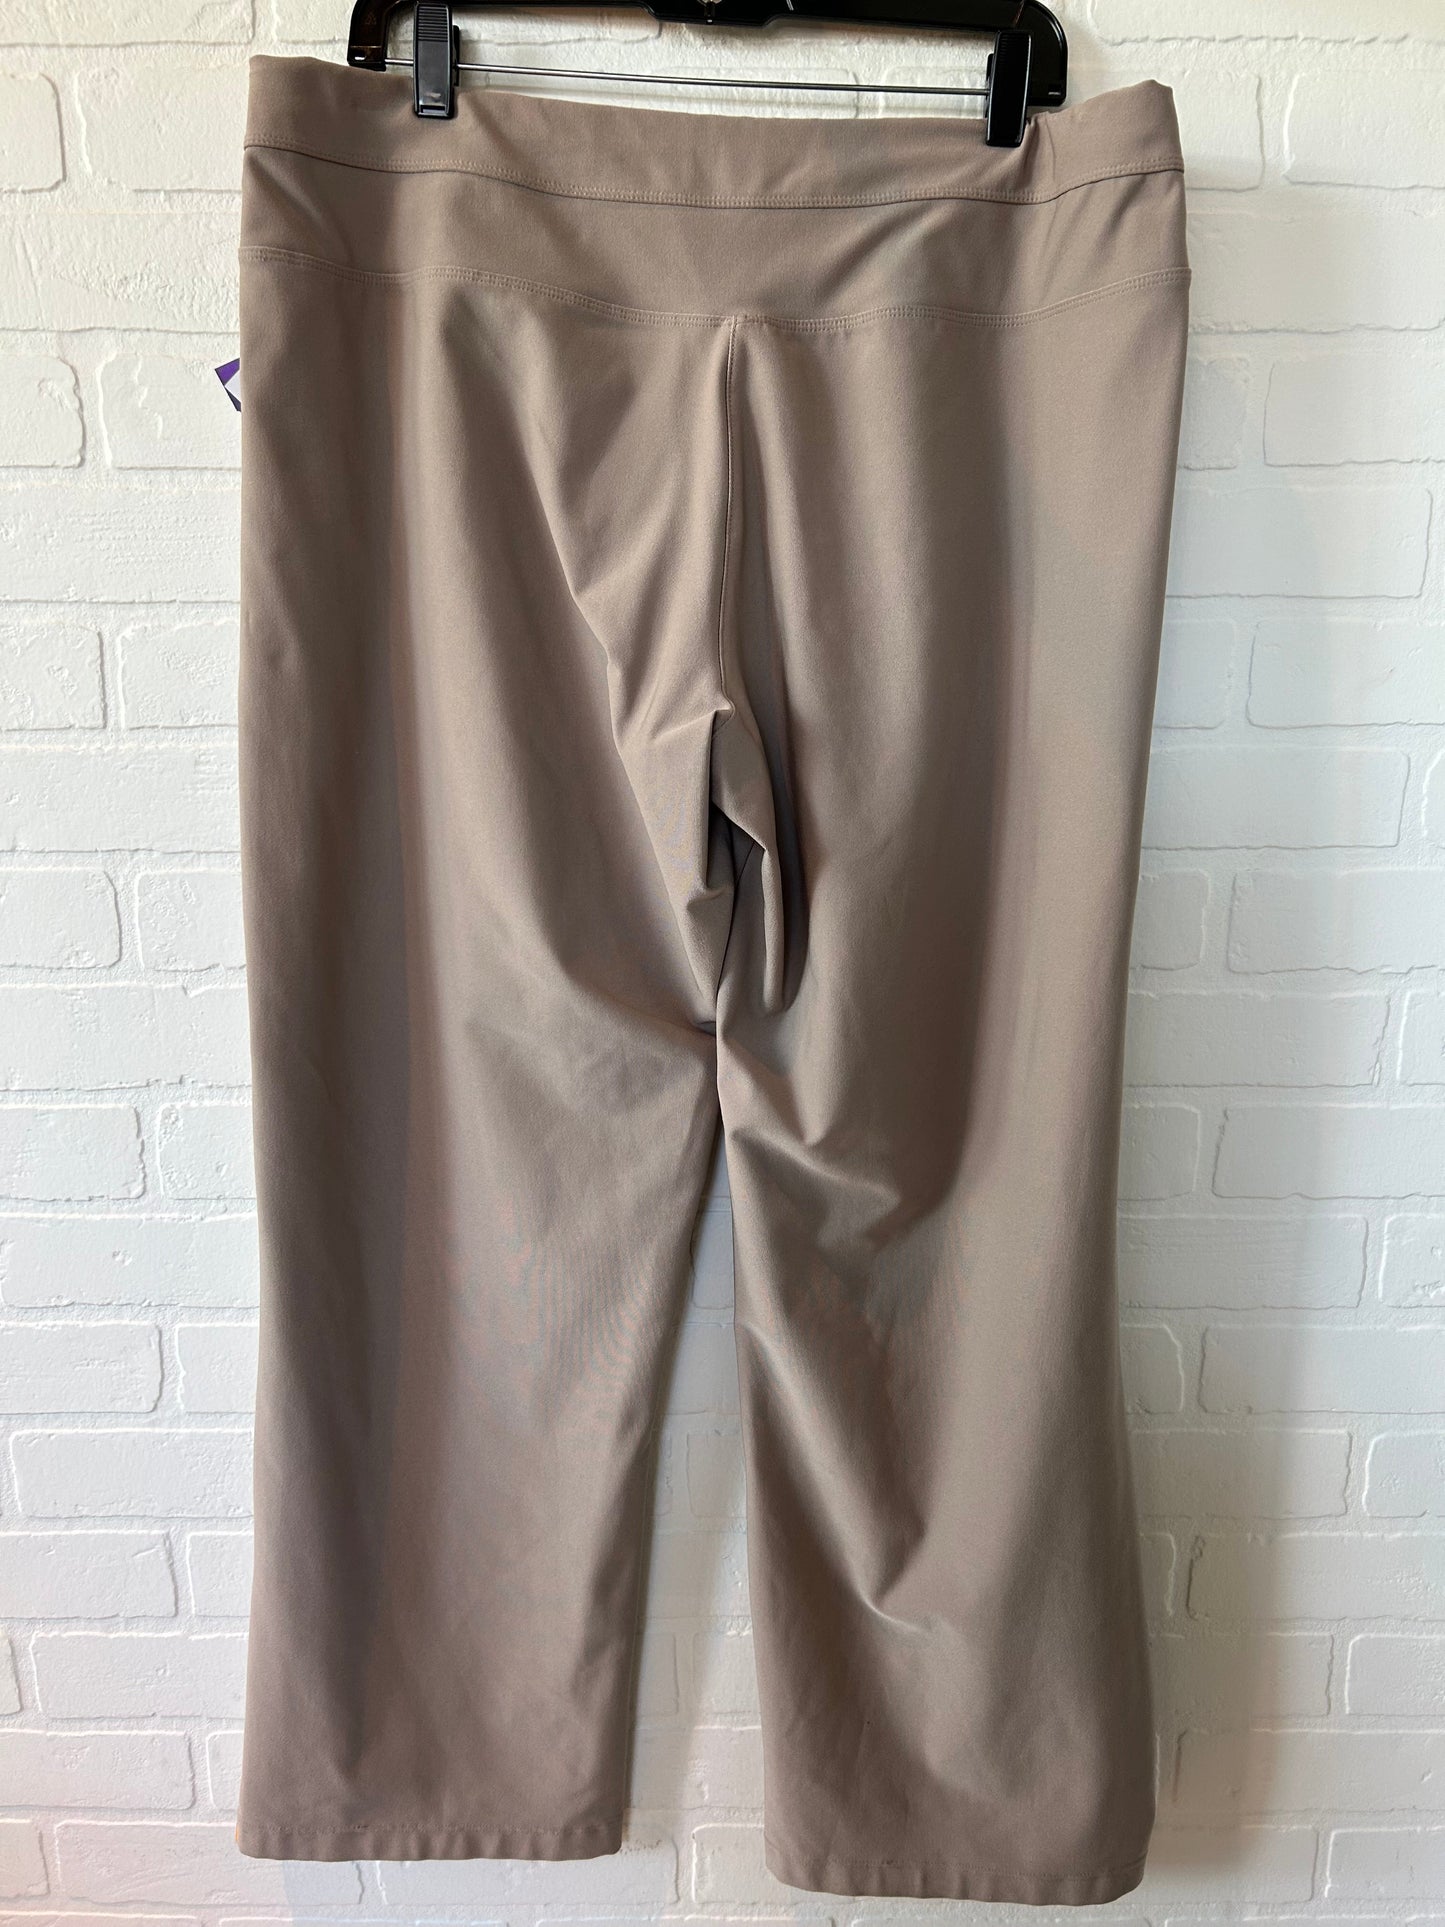 Tan Athletic Pants Lucy, Size 16